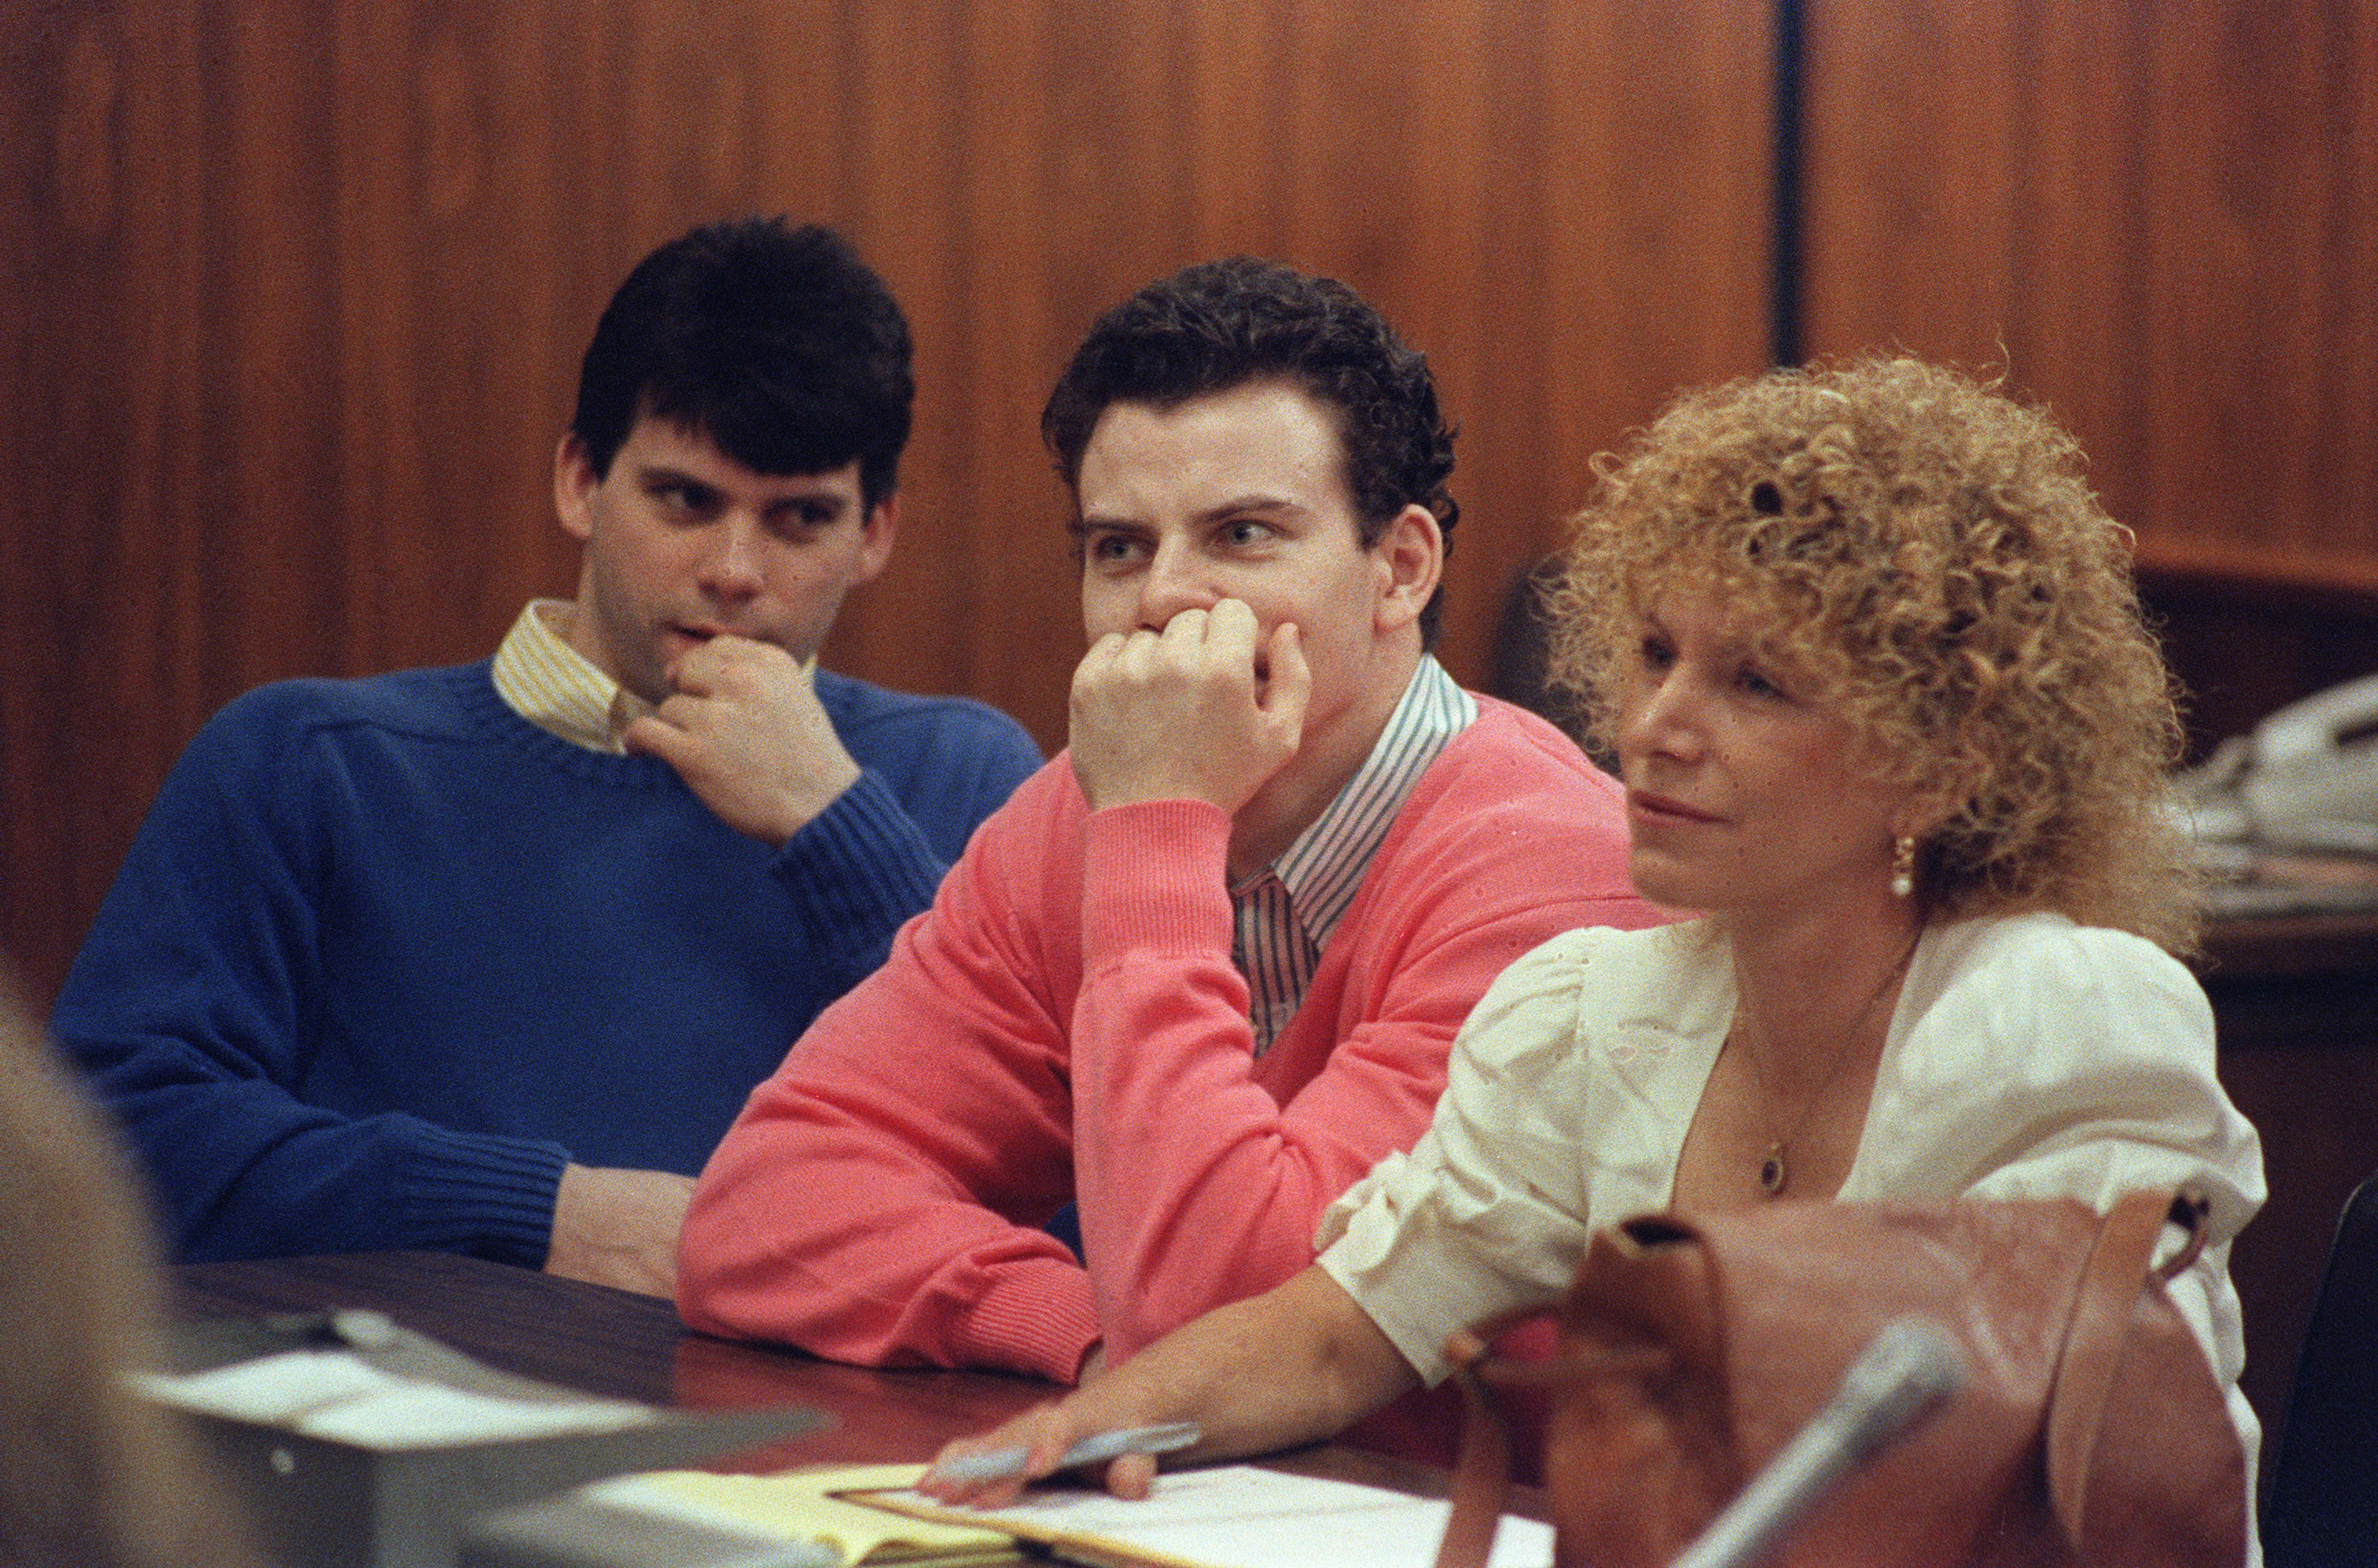 Erik Menendez (C) and his brother Lyle (L) are pictured, on Aug. 12, 1991 in Beverly Hills (Mike Nelson—AFP/Getty Images)